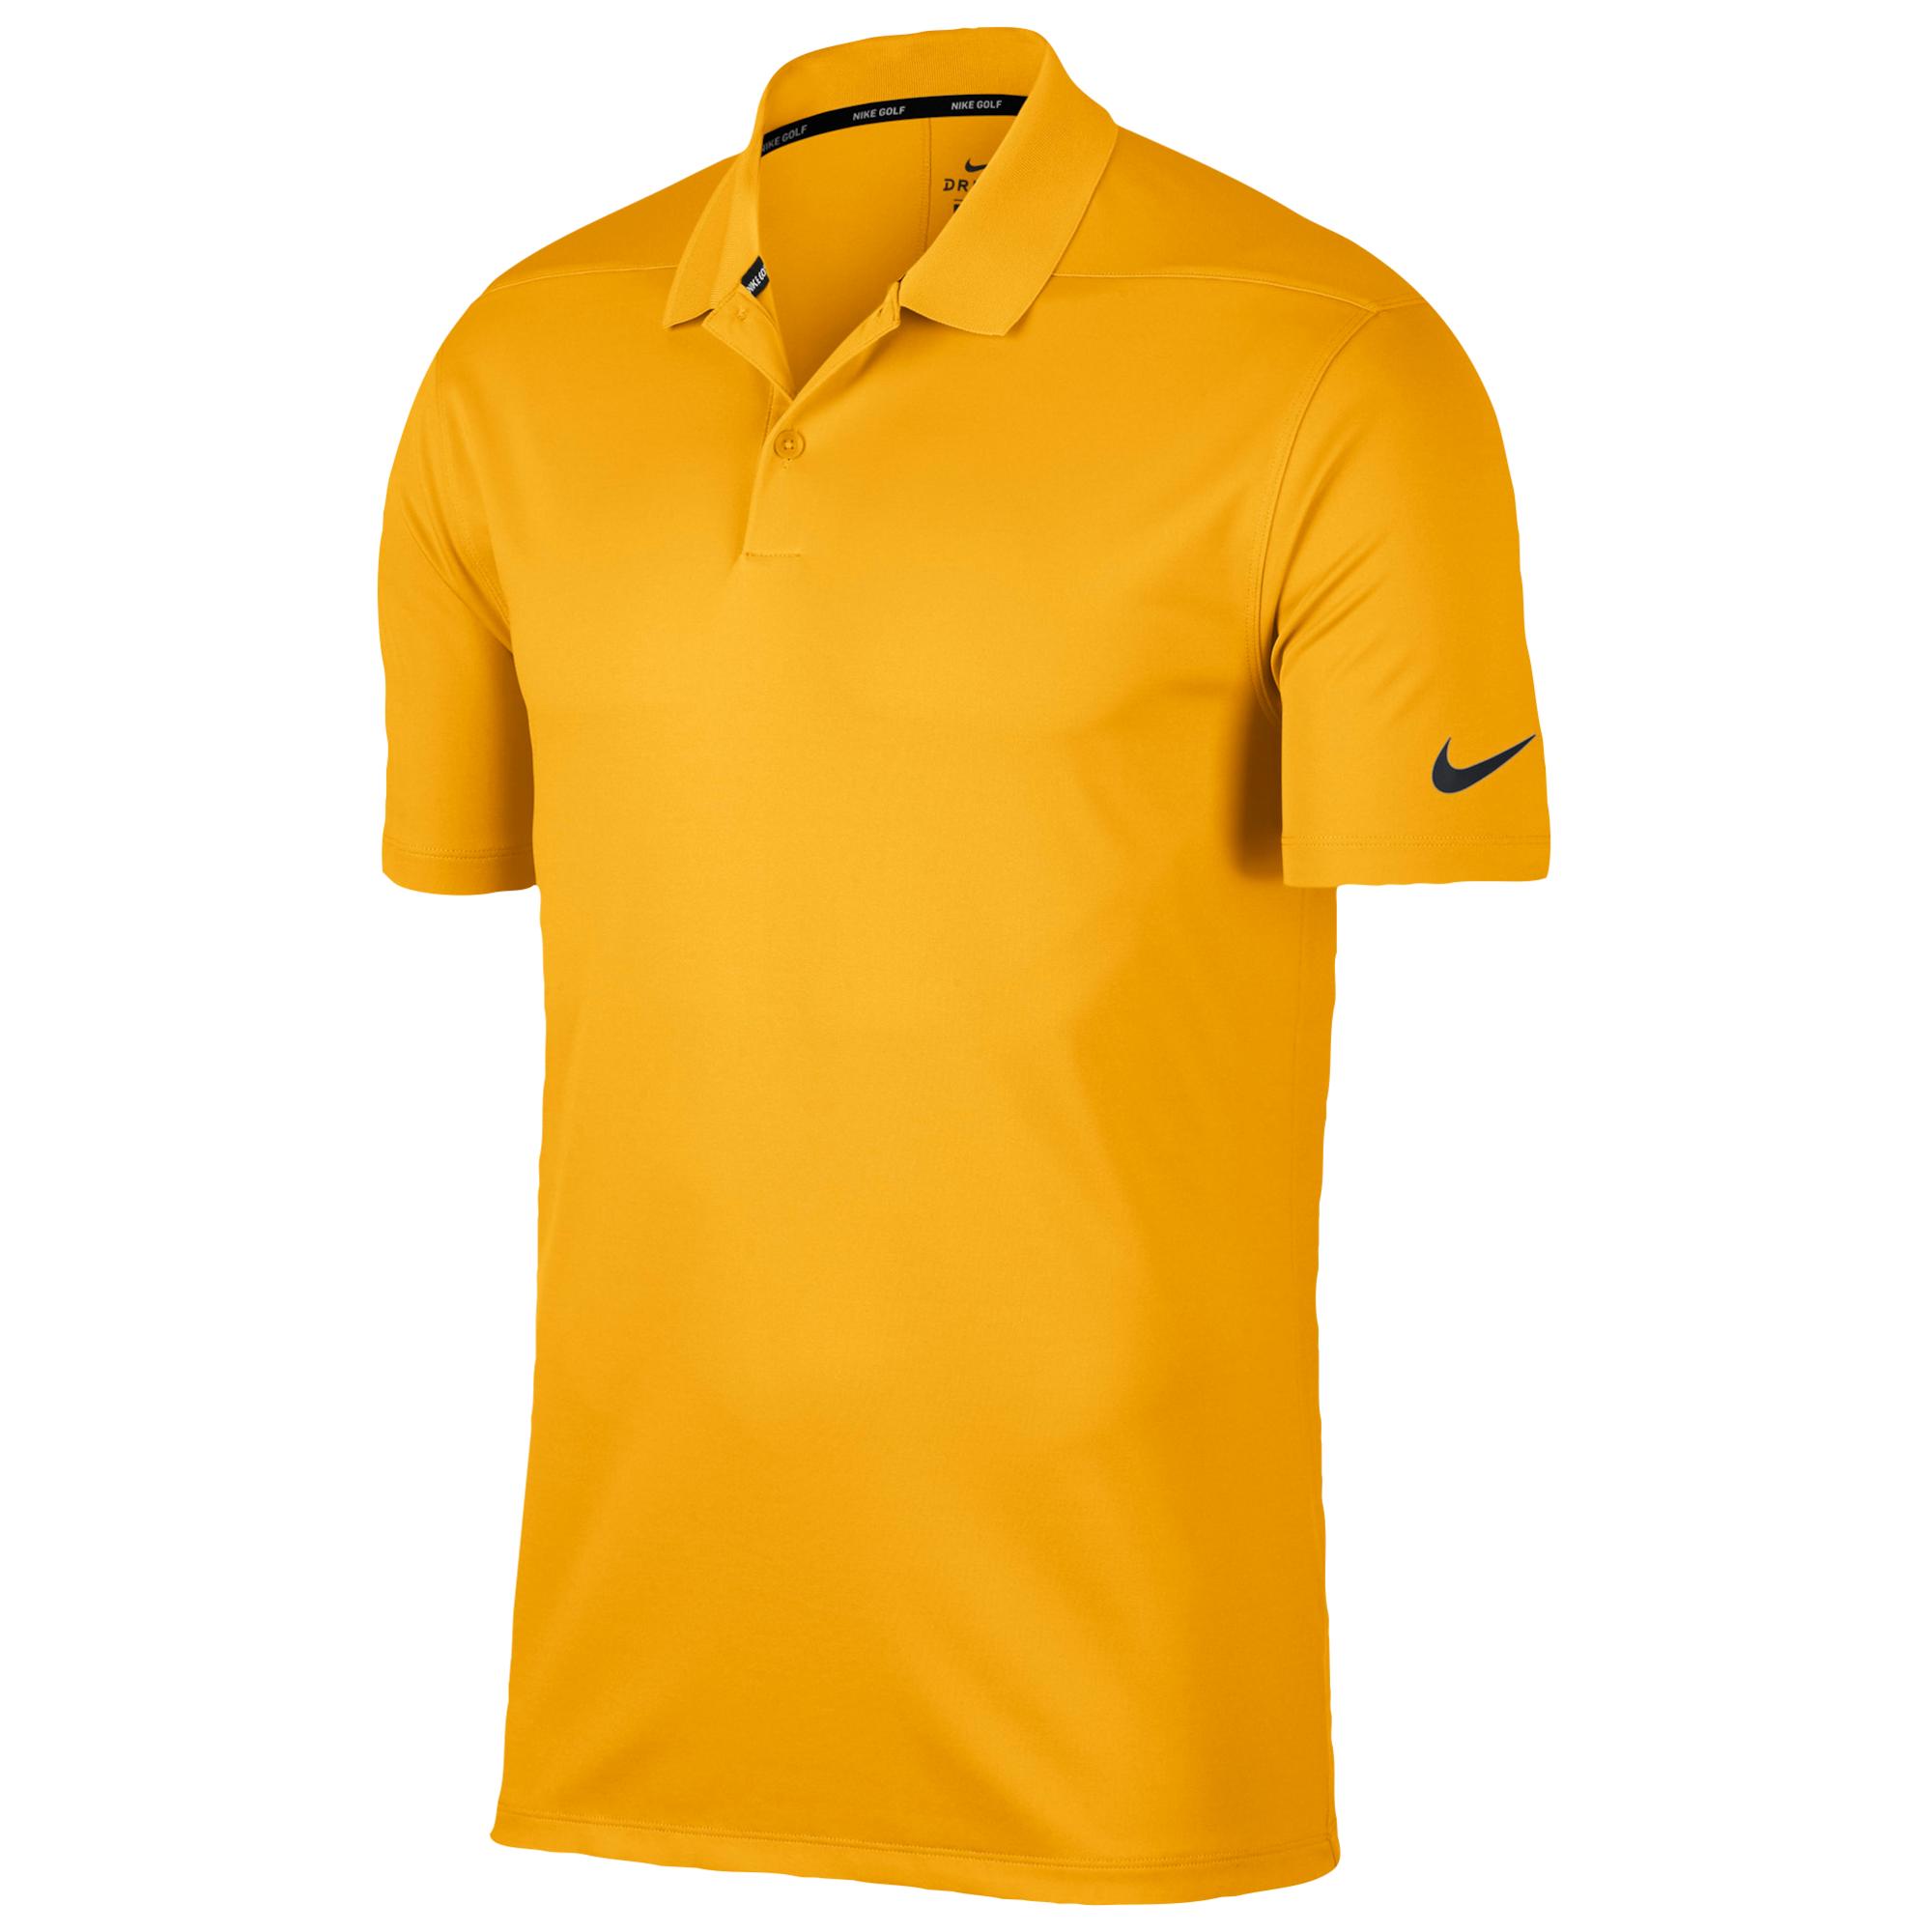 Nike Synthetic Drifit Victory Solid Golf Polo Shirt in University Gold